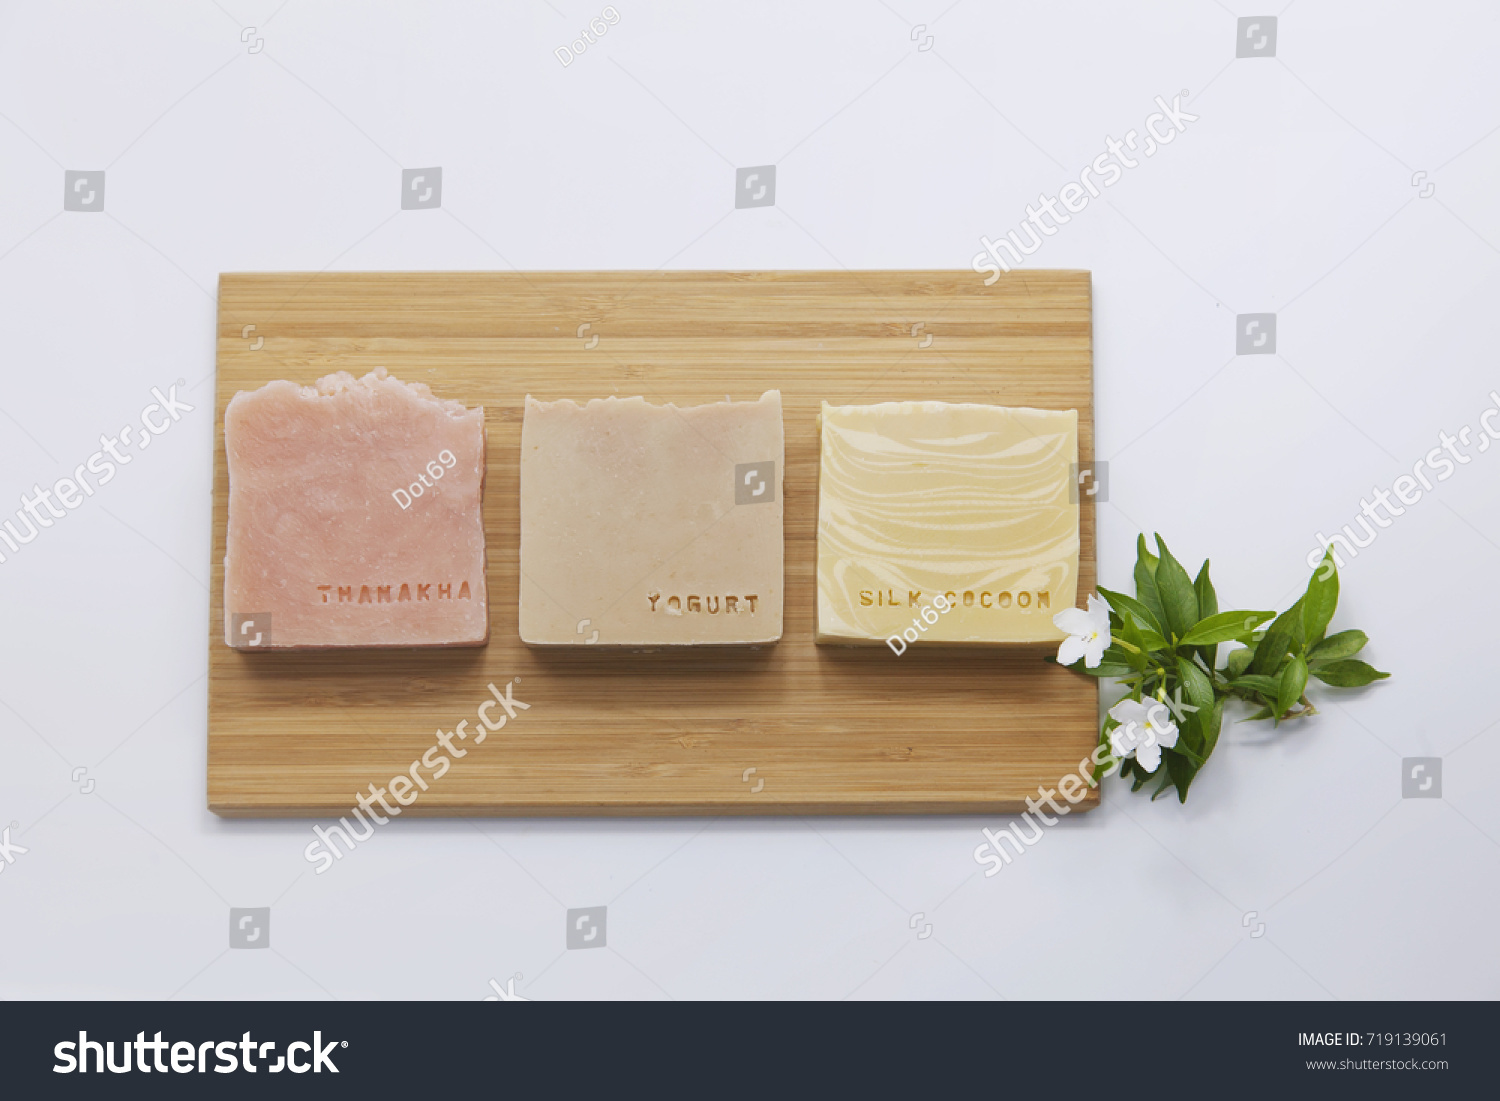 Handmade Soap closeup in wooden plate #719139061